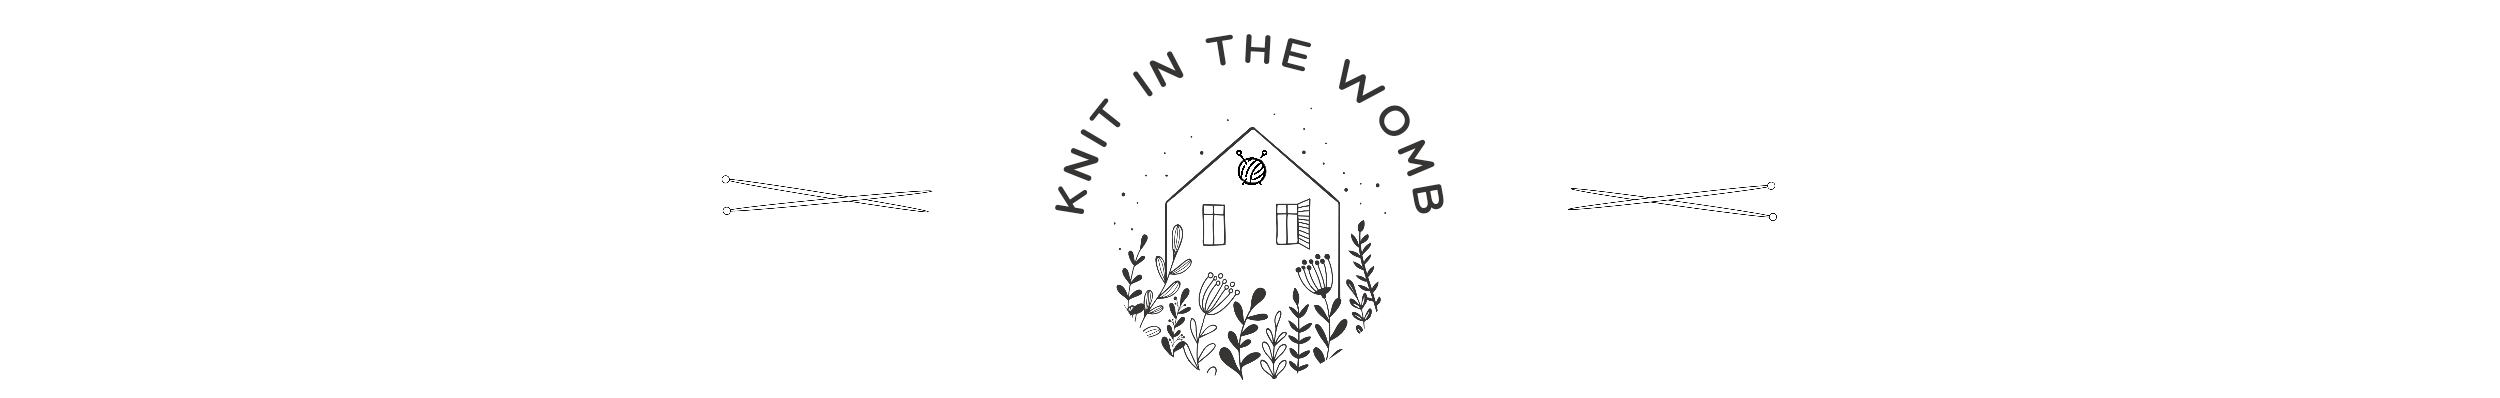 The Knit in the Womb Blog